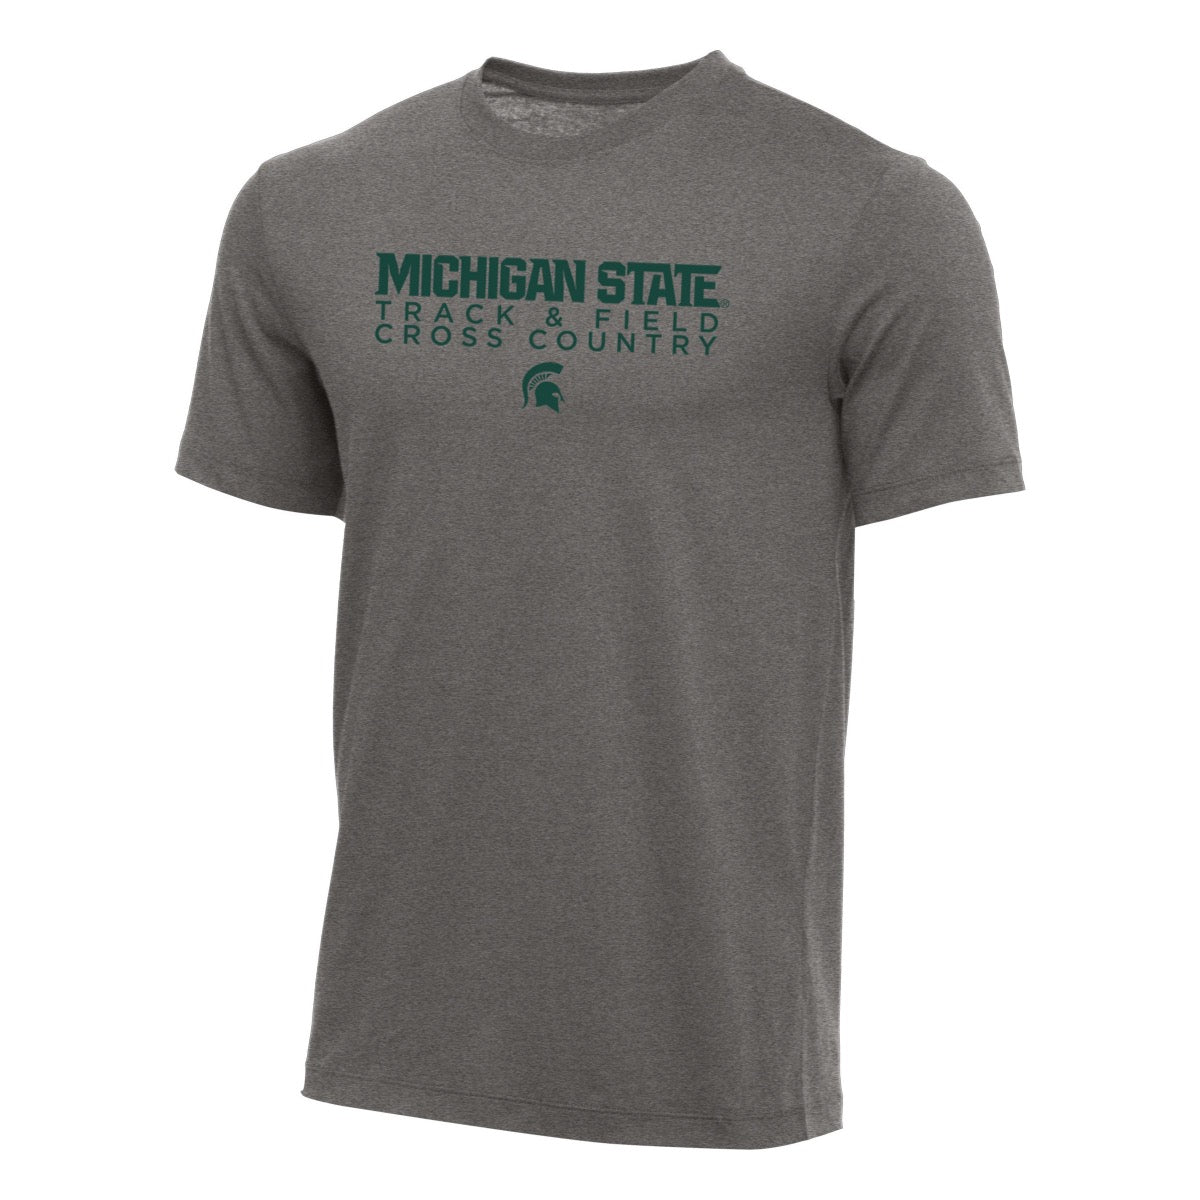 Michigan State Track & Field / Cross Country Core Short Sleeve